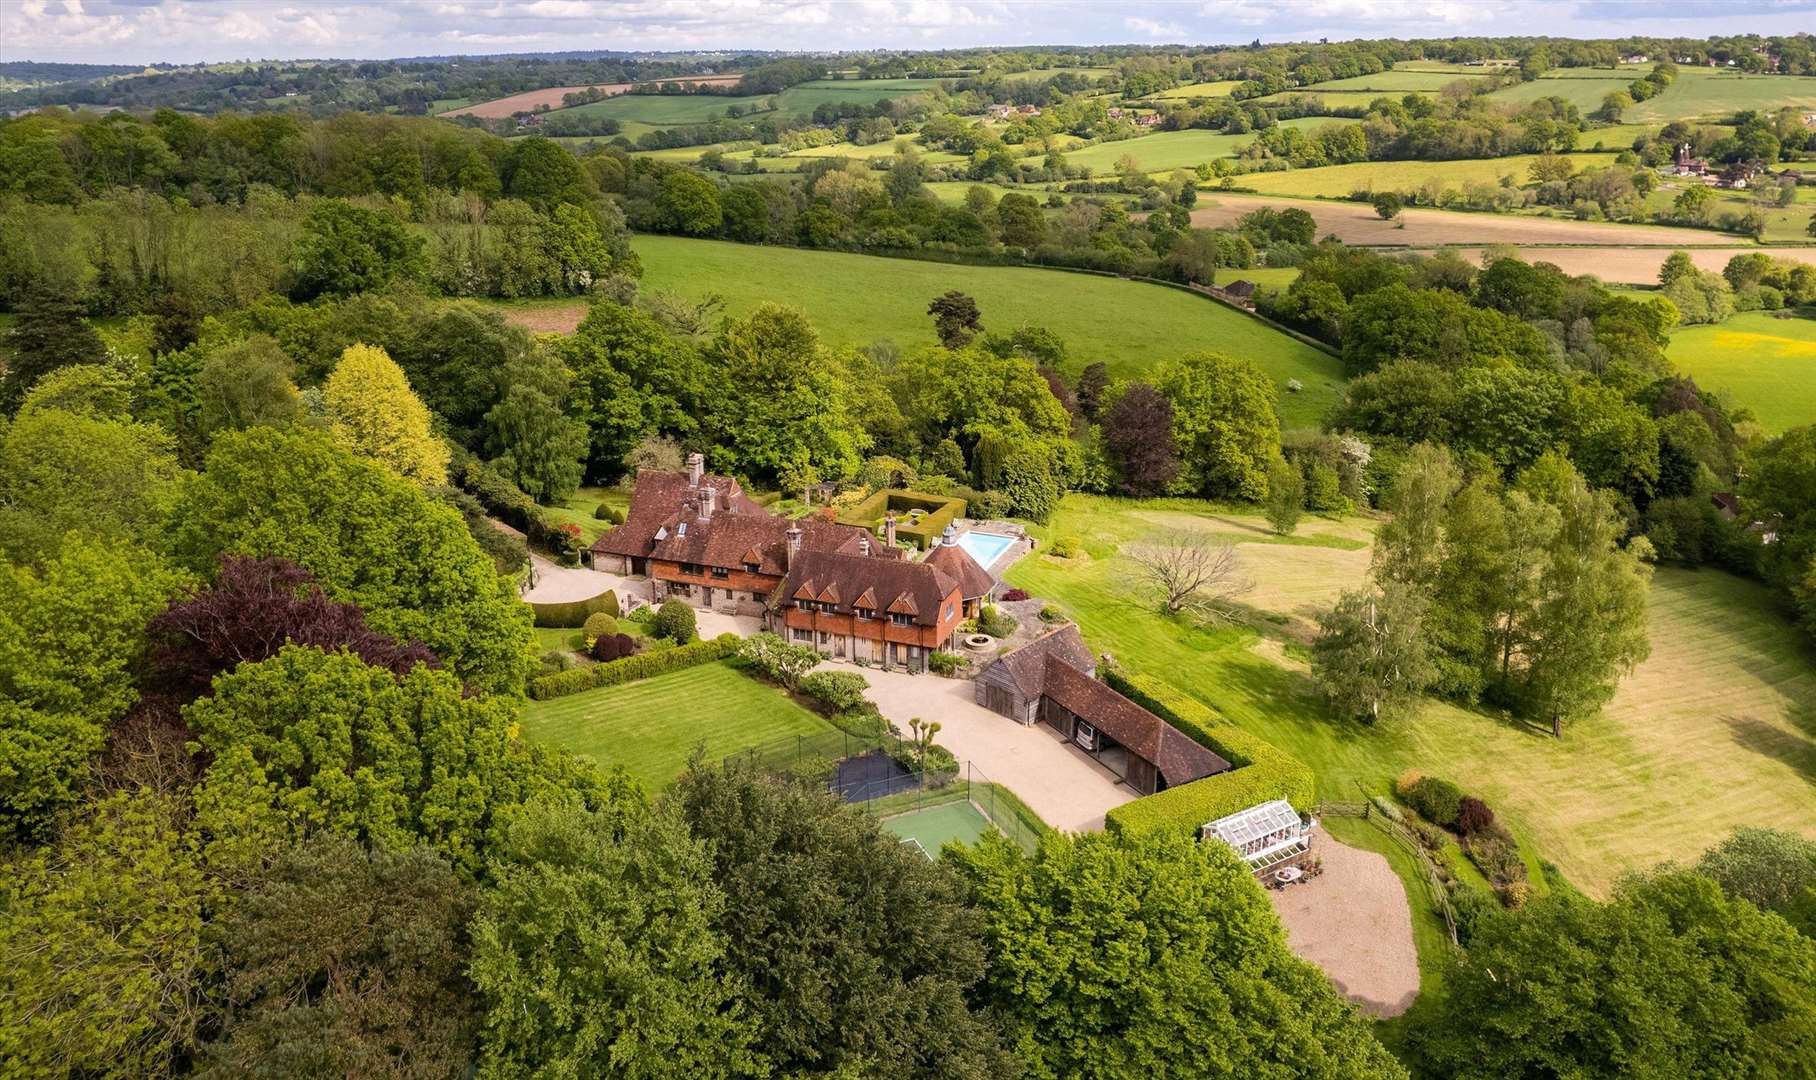 The country house is surrounded by sprawling countryside. Picture: Knight Frank